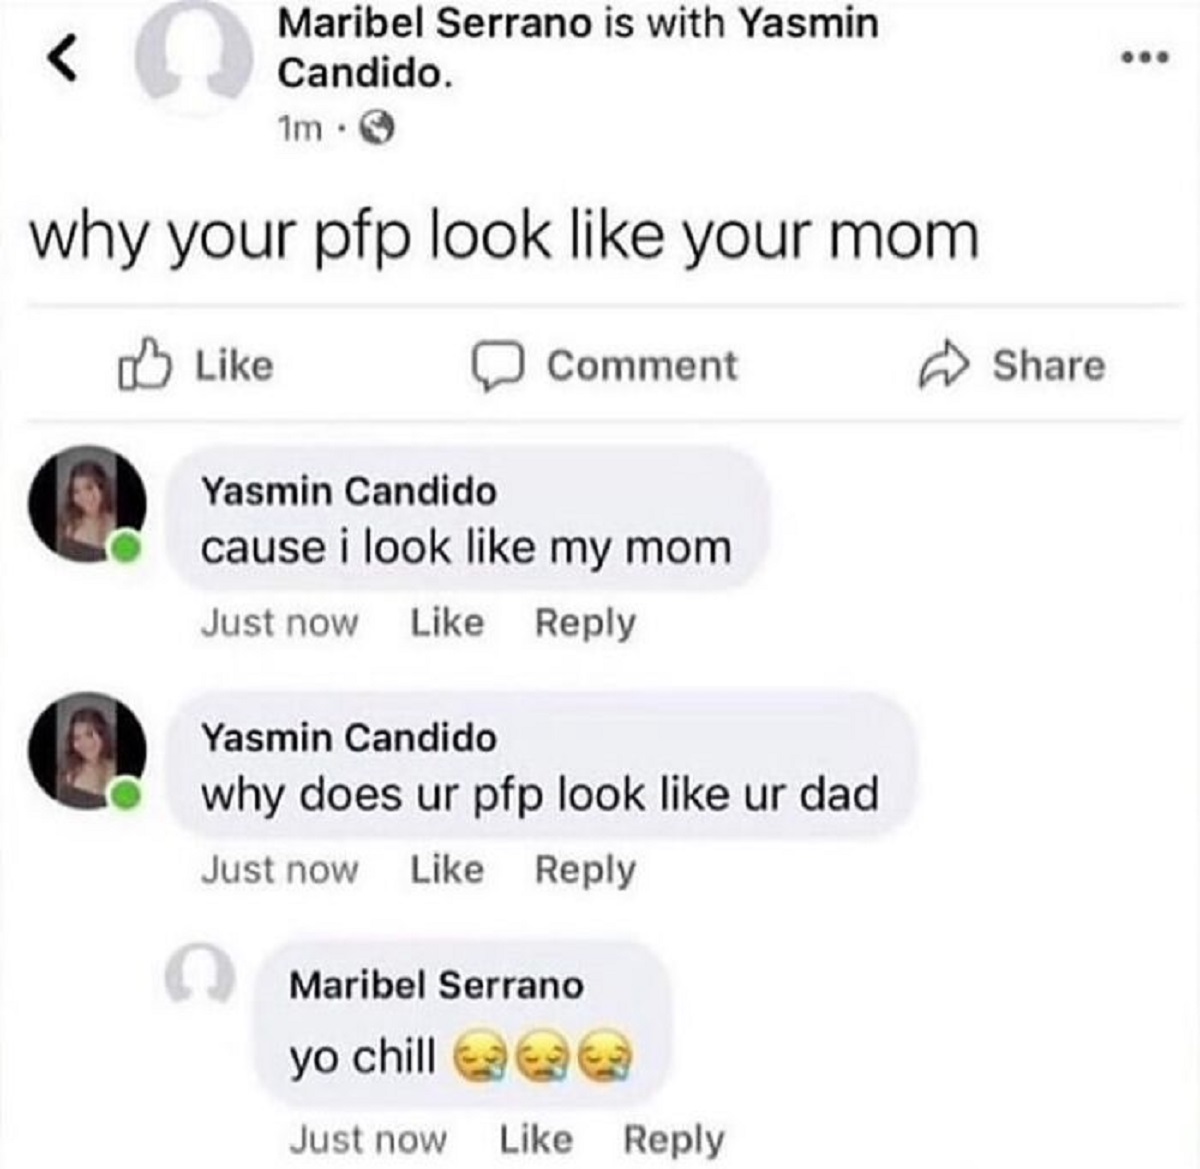 document - Maribel Serrano is with Yasmin Candido. 1m. O why your pfp look your mom Comment Yasmin Candido cause i look my mom Just now Yasmin Candido why does ur pfp look ur dad Just now Maribel Serrano yo chill Just now